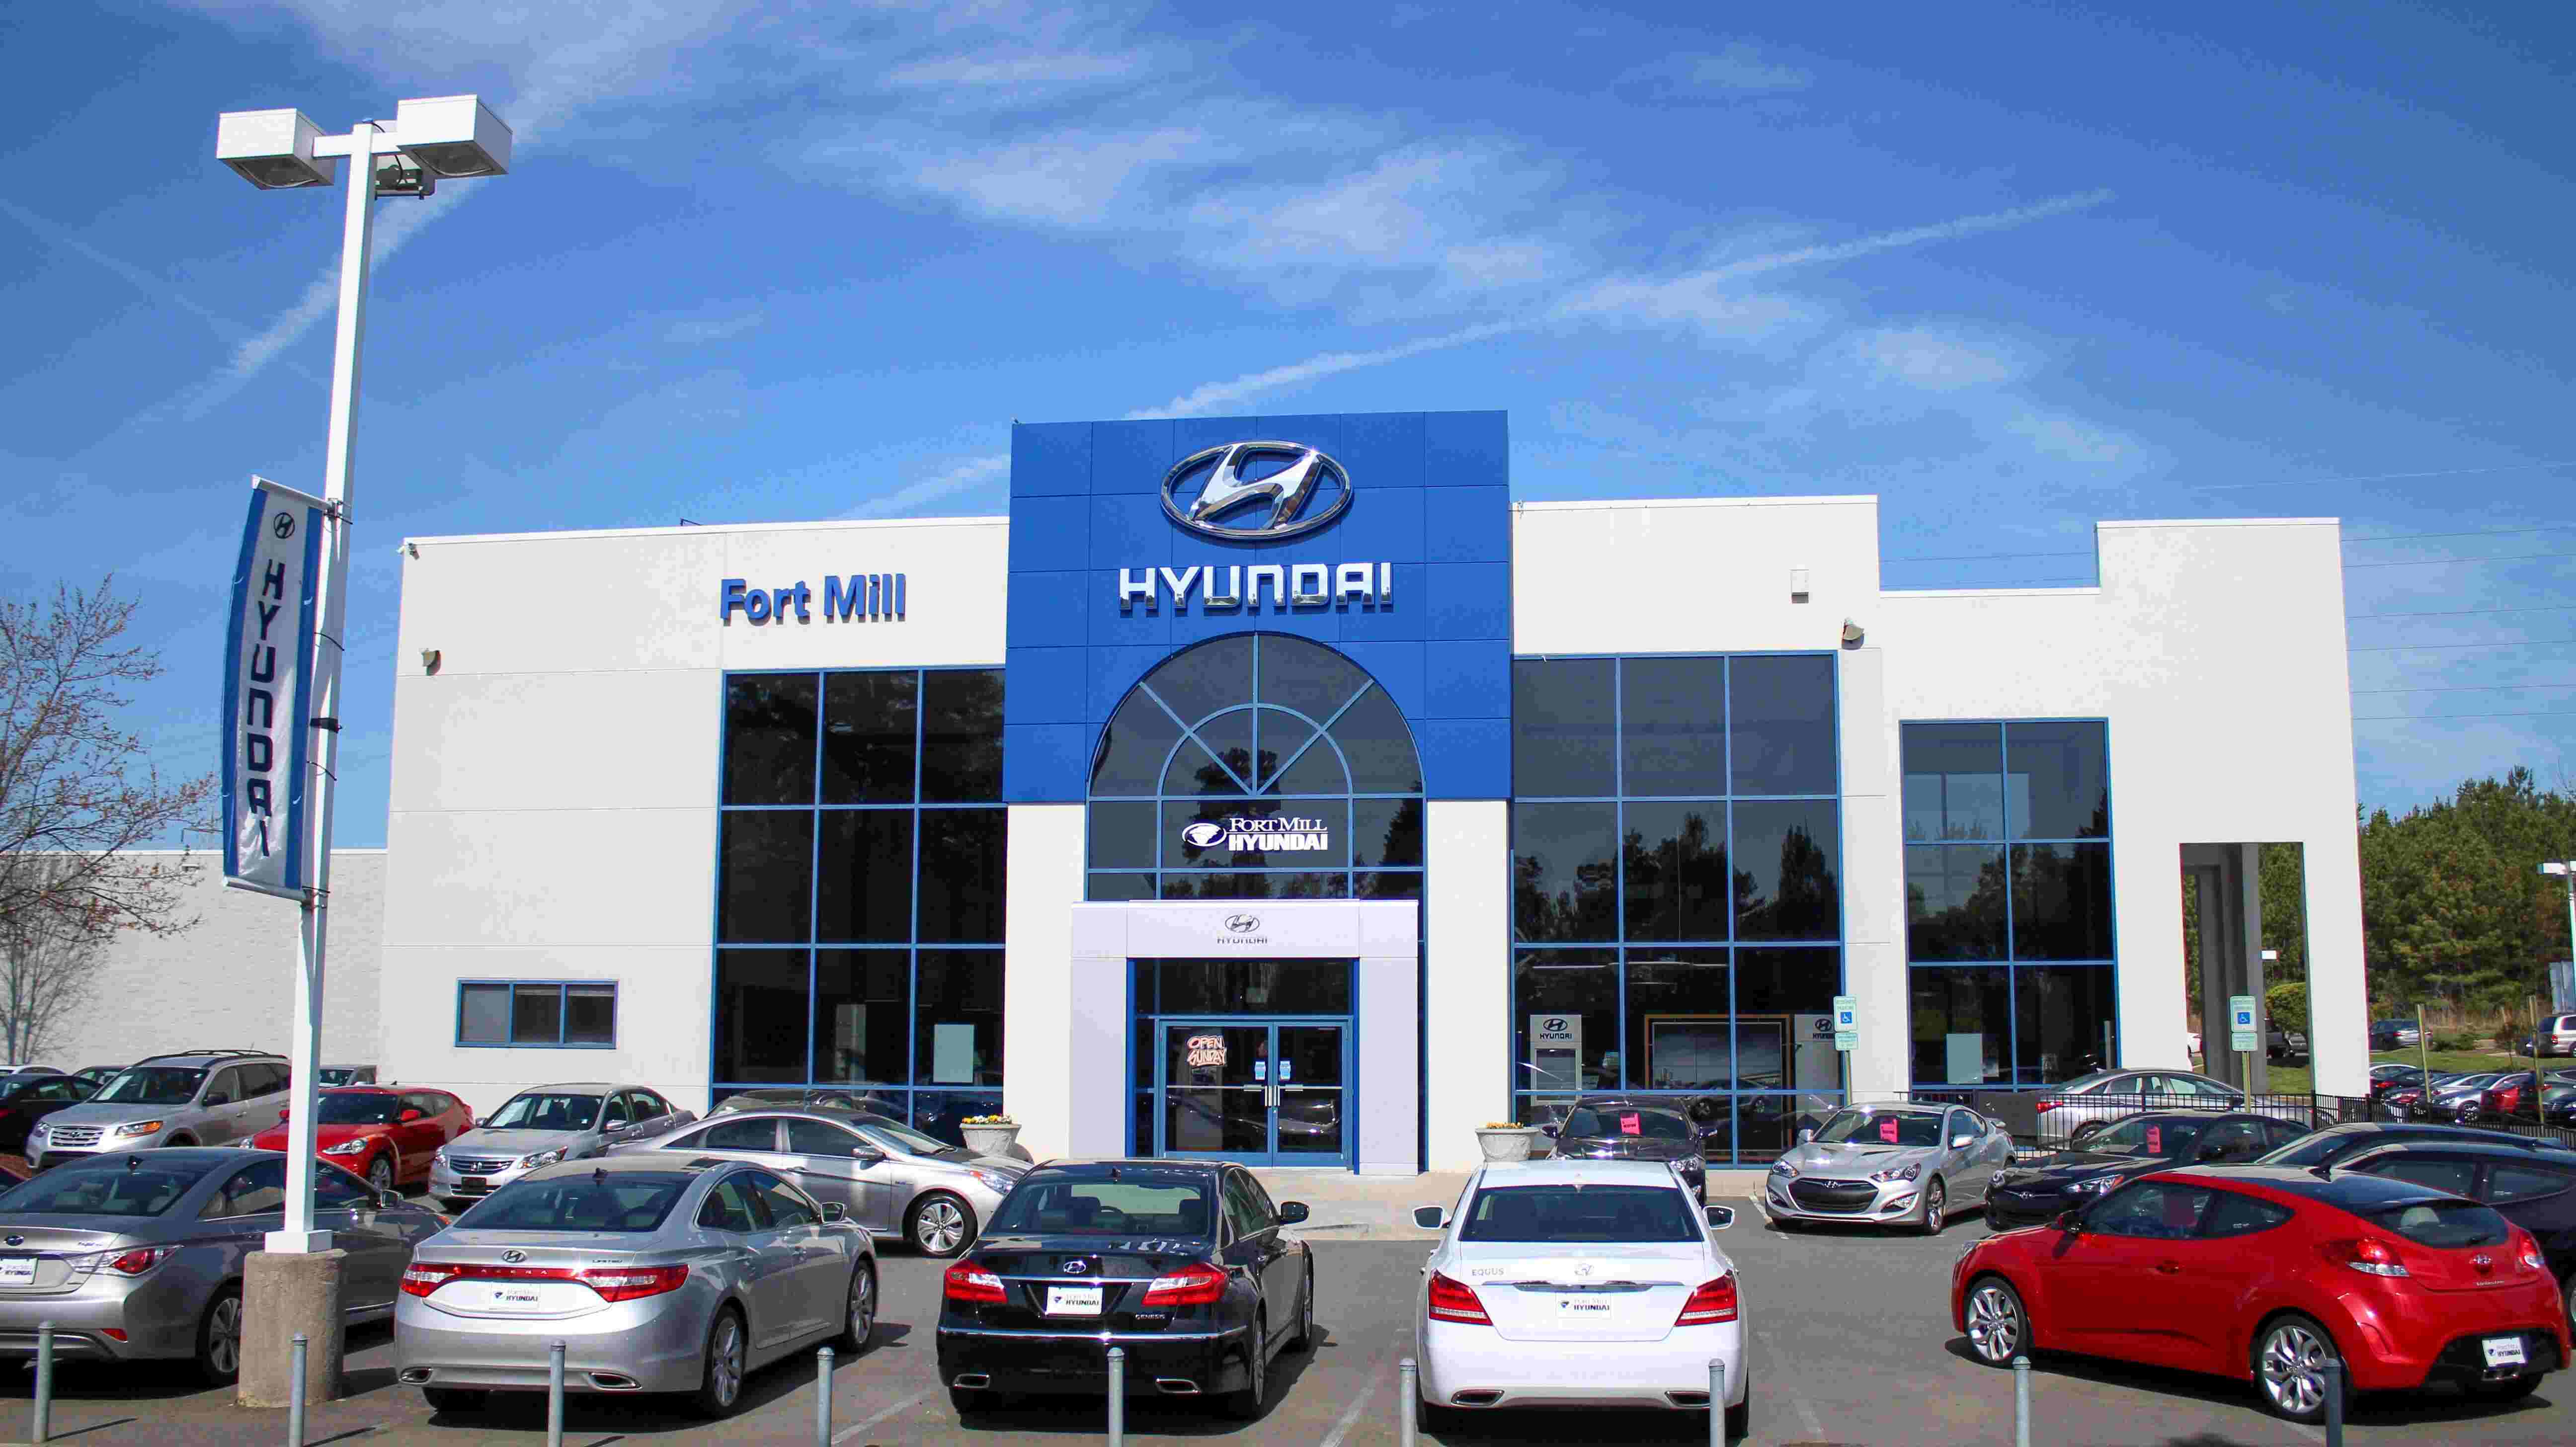 Welcome to Fort Mill Hyundai in Fort Mill, South Carolina! Our dealership is your premier destination for new and used Hyundai vehicles. With state-of-the-art facilities and a passionate team of experts, we're here to make your car-buying experience hassle-free and enjoyable every step of the way. Contact us today!